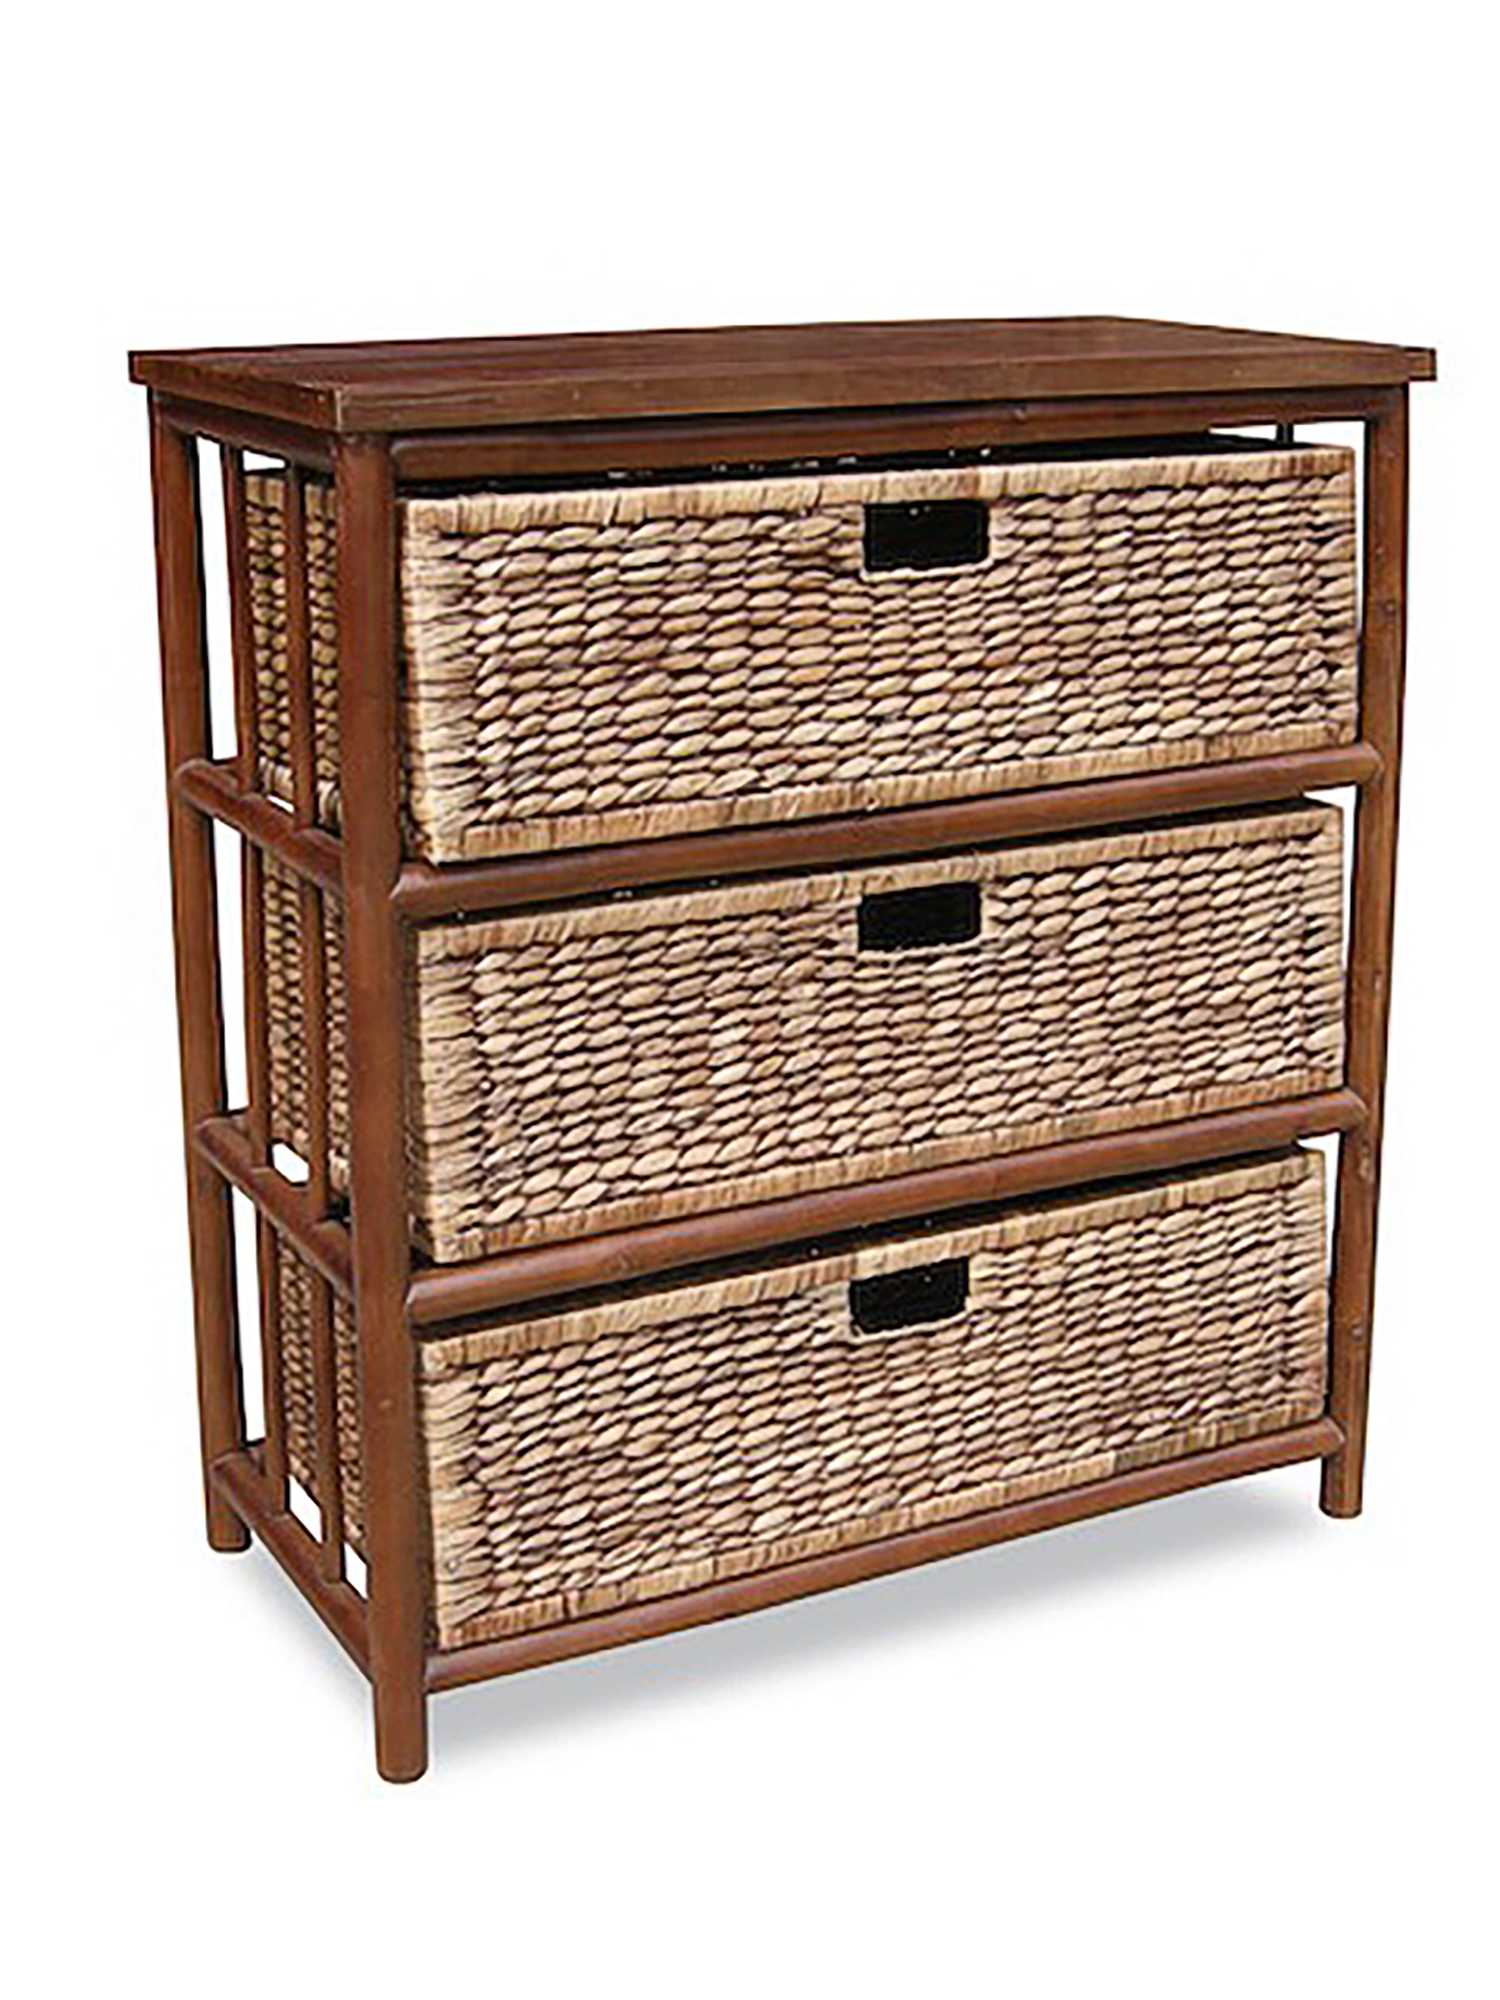 30" X 15.25" X 32.5" Brown Bamboo Storage Cabinet with Baskets